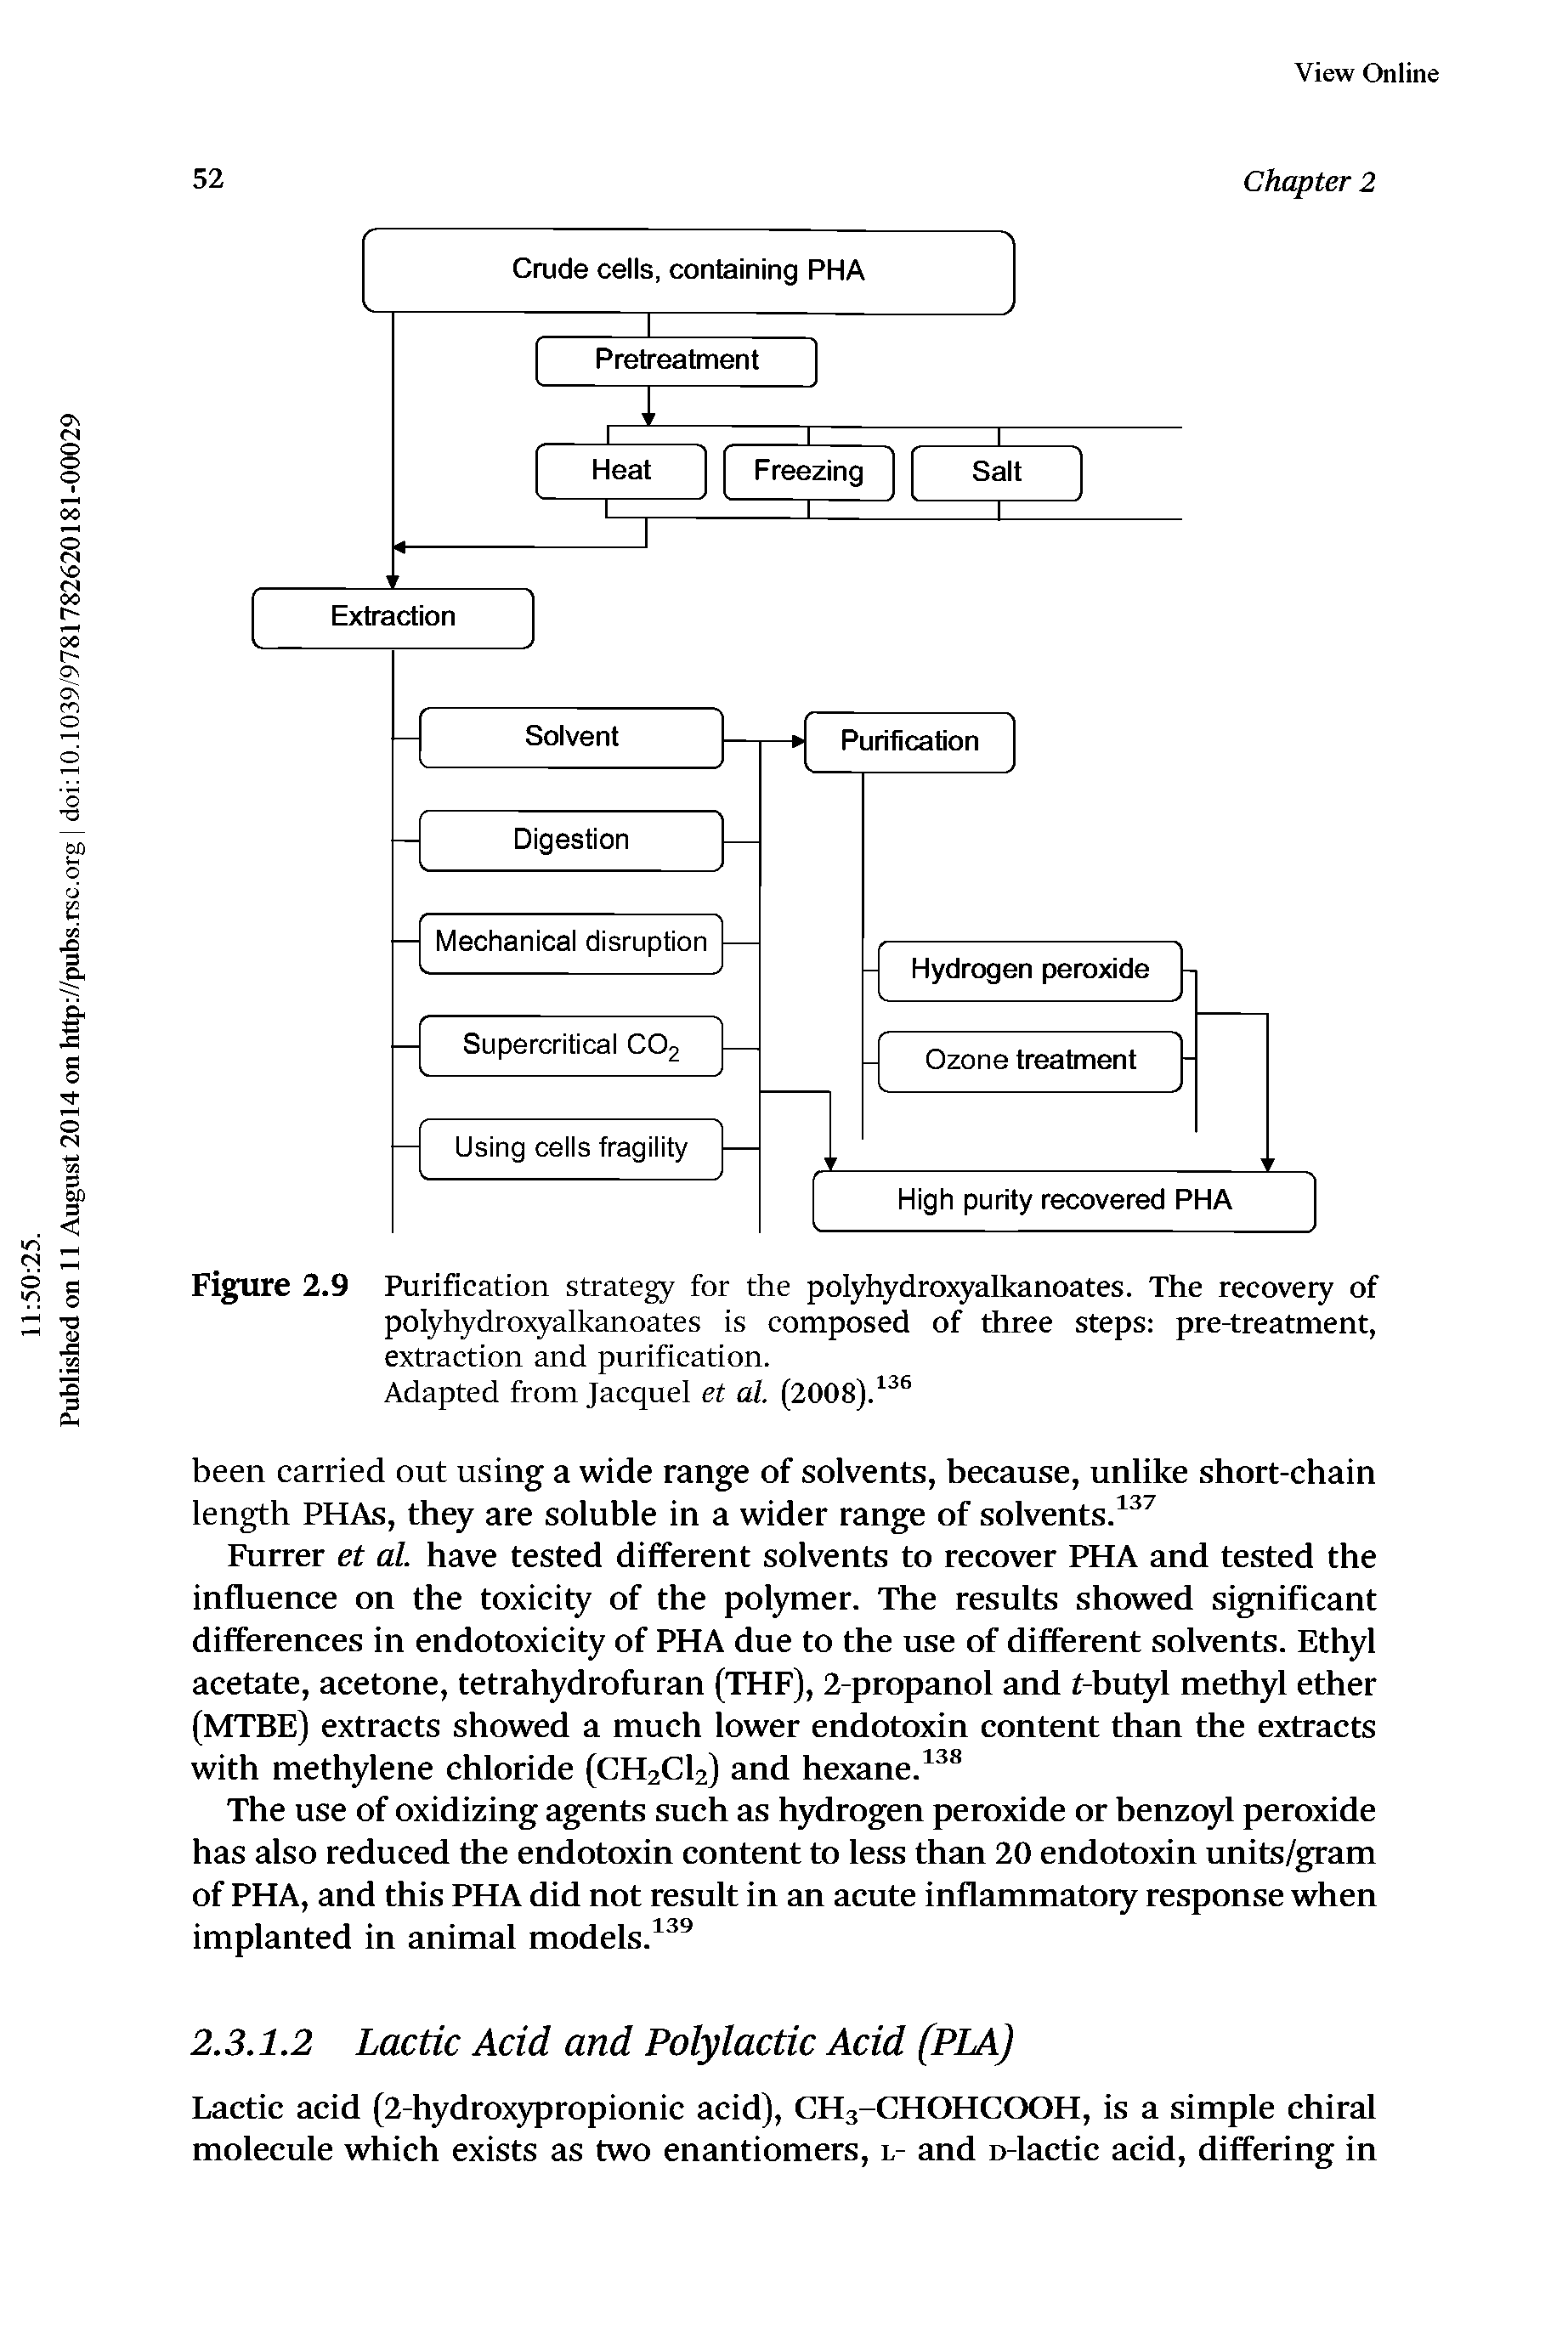 Figure 2.9 Purification strategy for the polyhydroxyalkanoates. The recovery of polyhydroxyalkanoates is composed of three steps pre-treatment, extraction and purification.